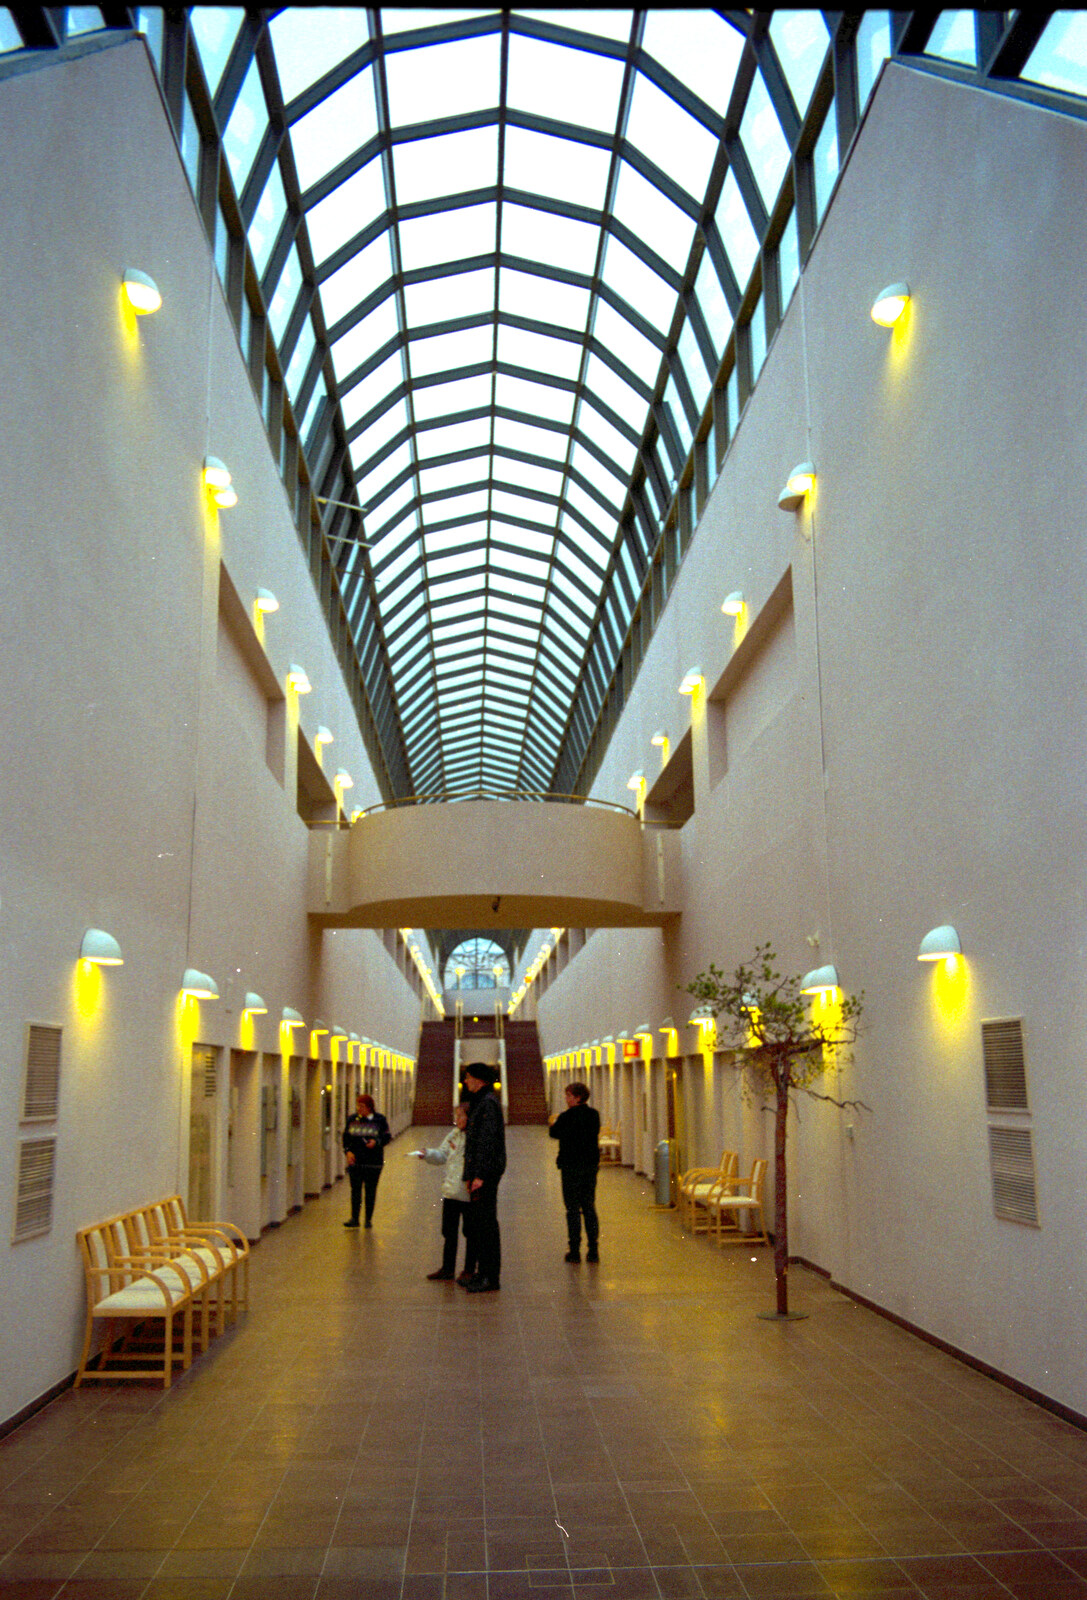 Inside the Arktikum from A Trip to Rovaniemi and the Arctic Circle, Lapland, Finland - 28th November 1999